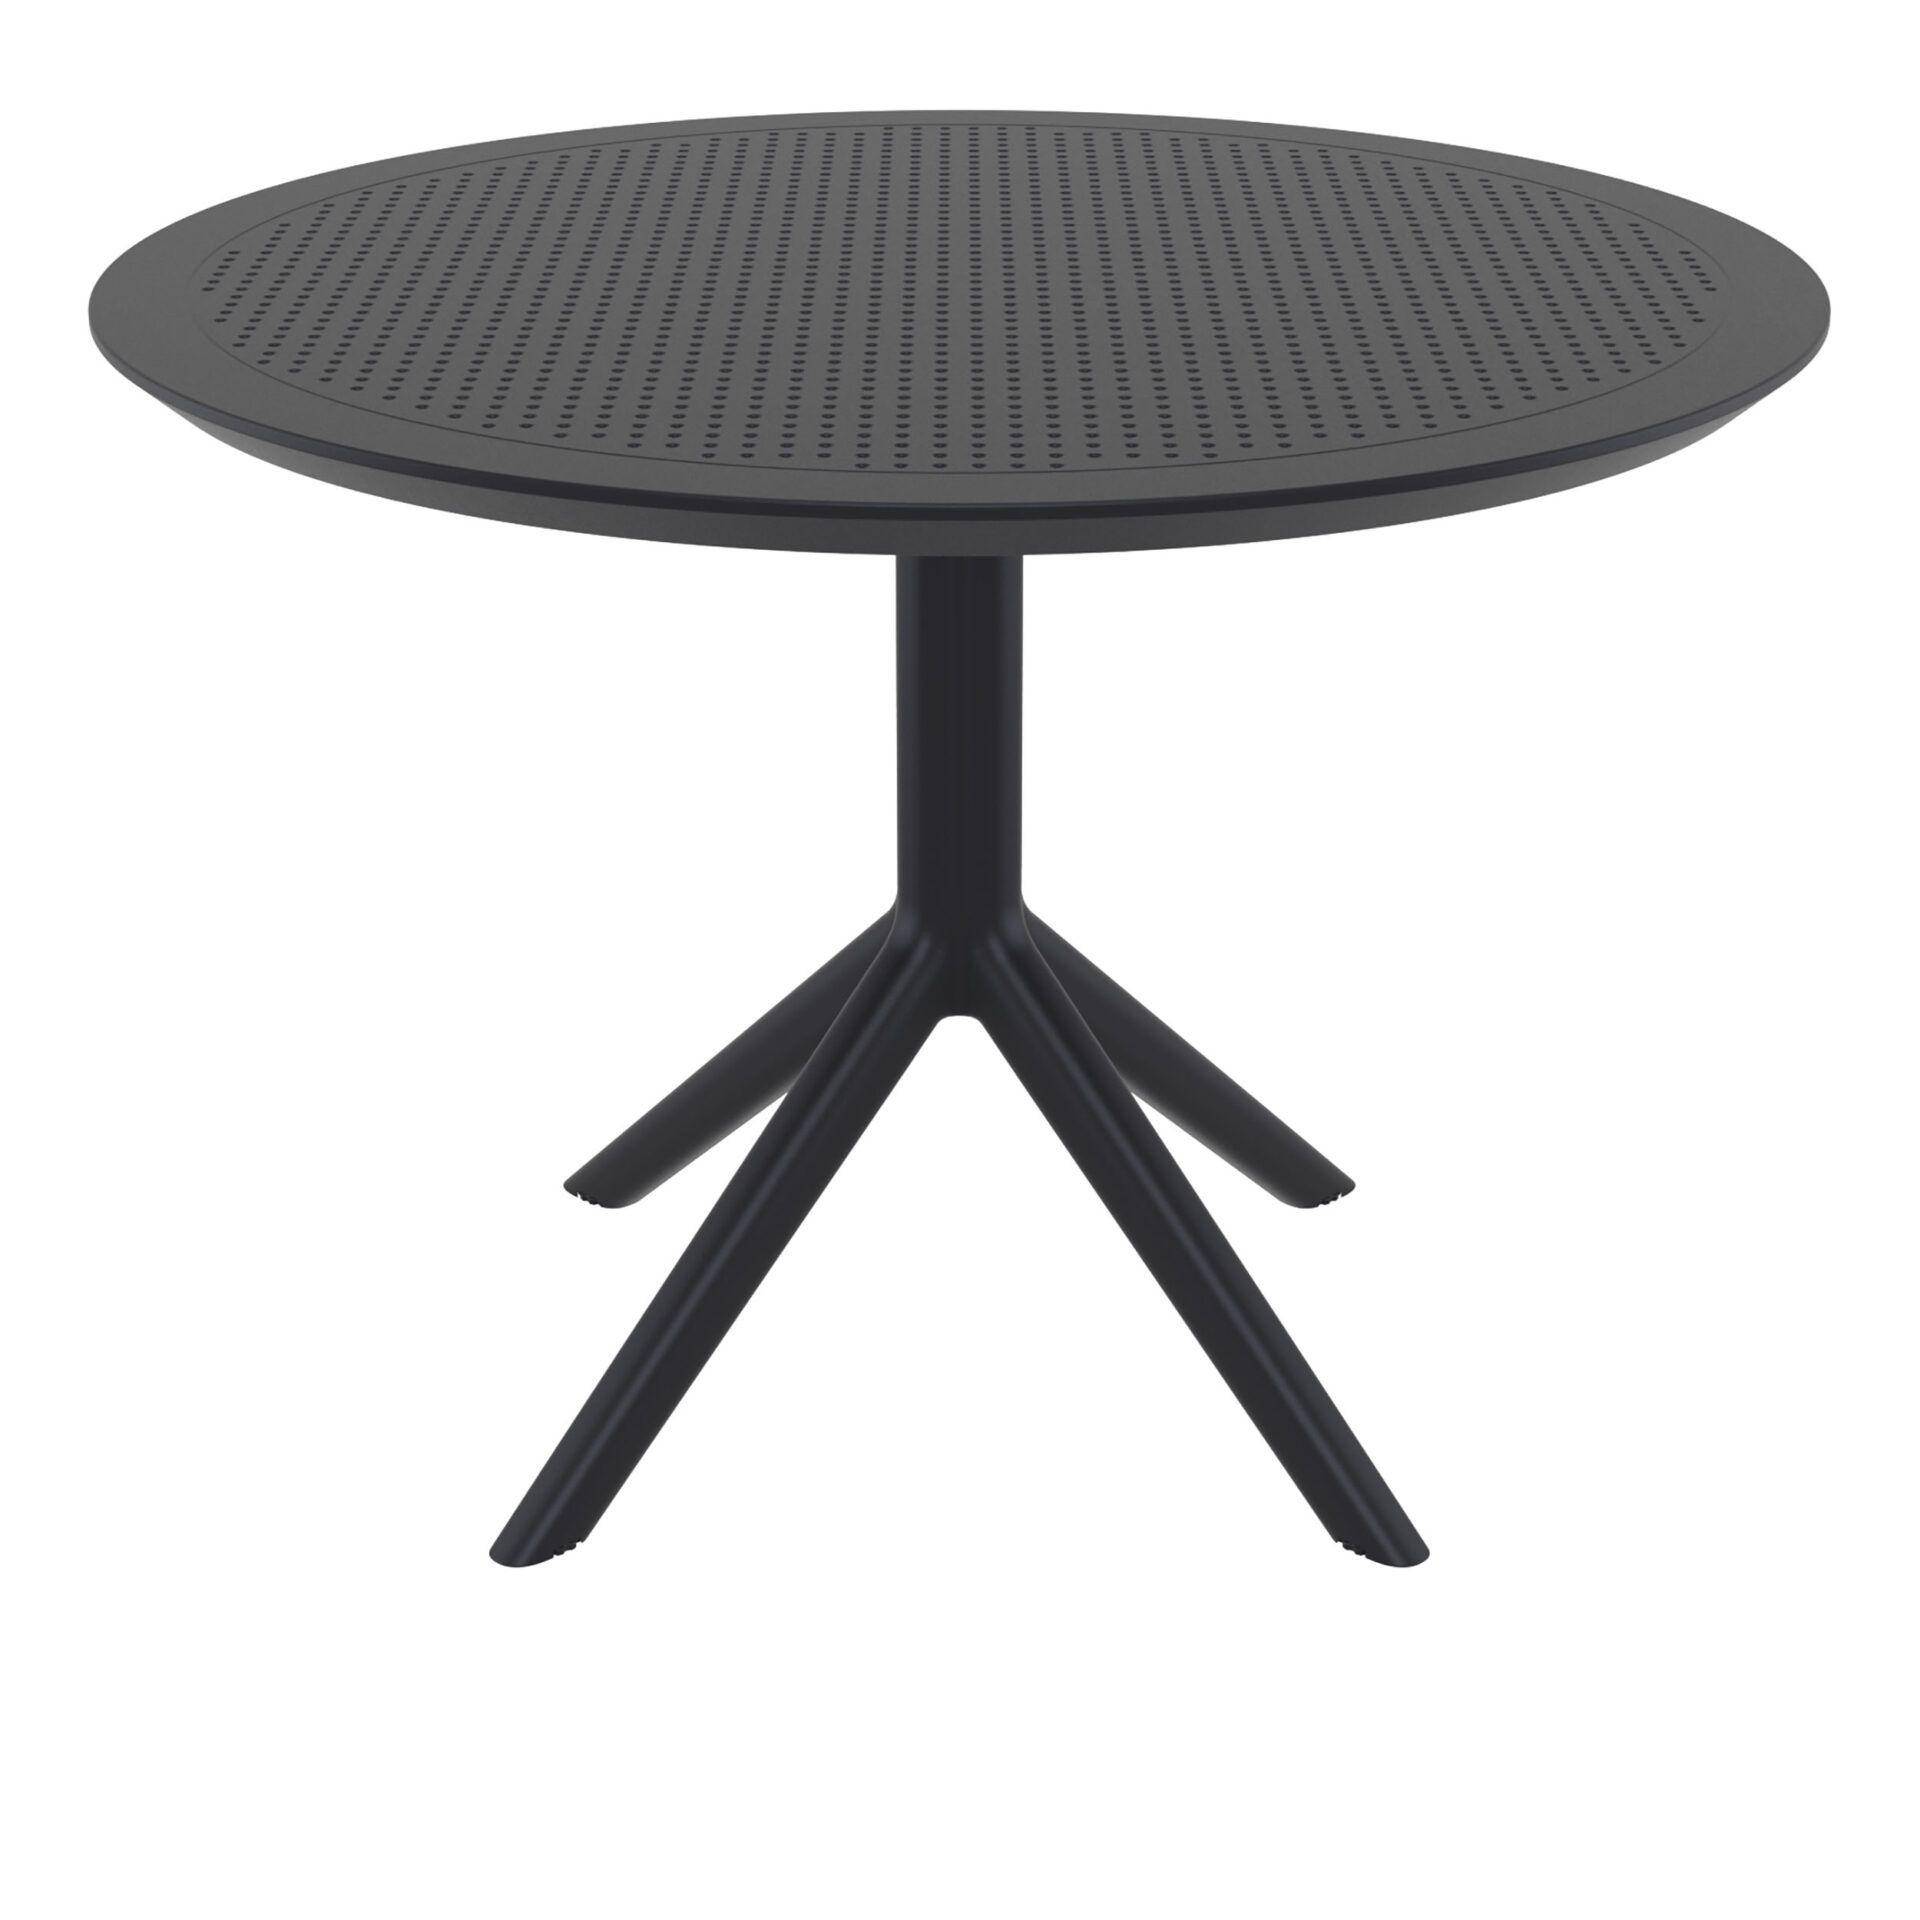 001 sky table 105 black front